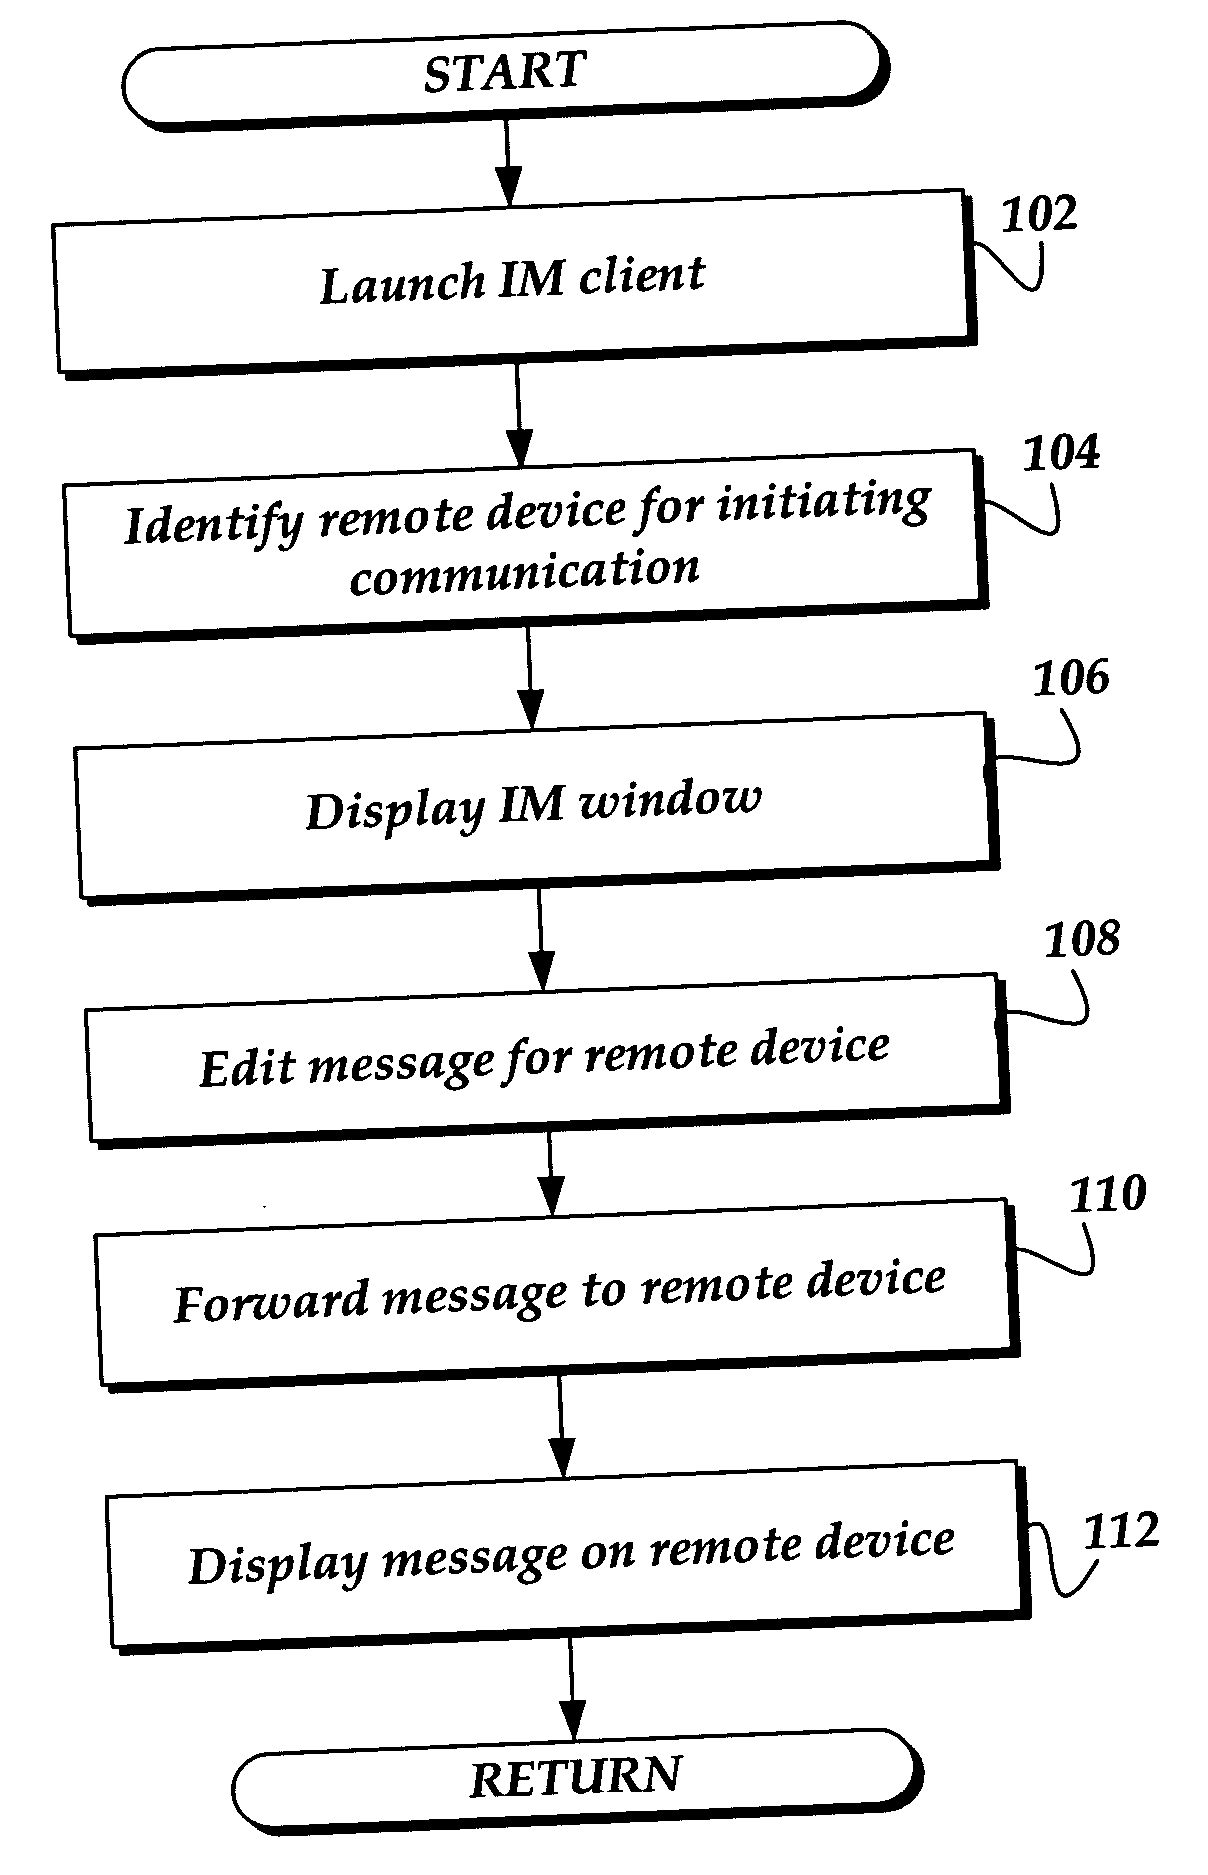 Establishing communication between a messaging client and a remote device